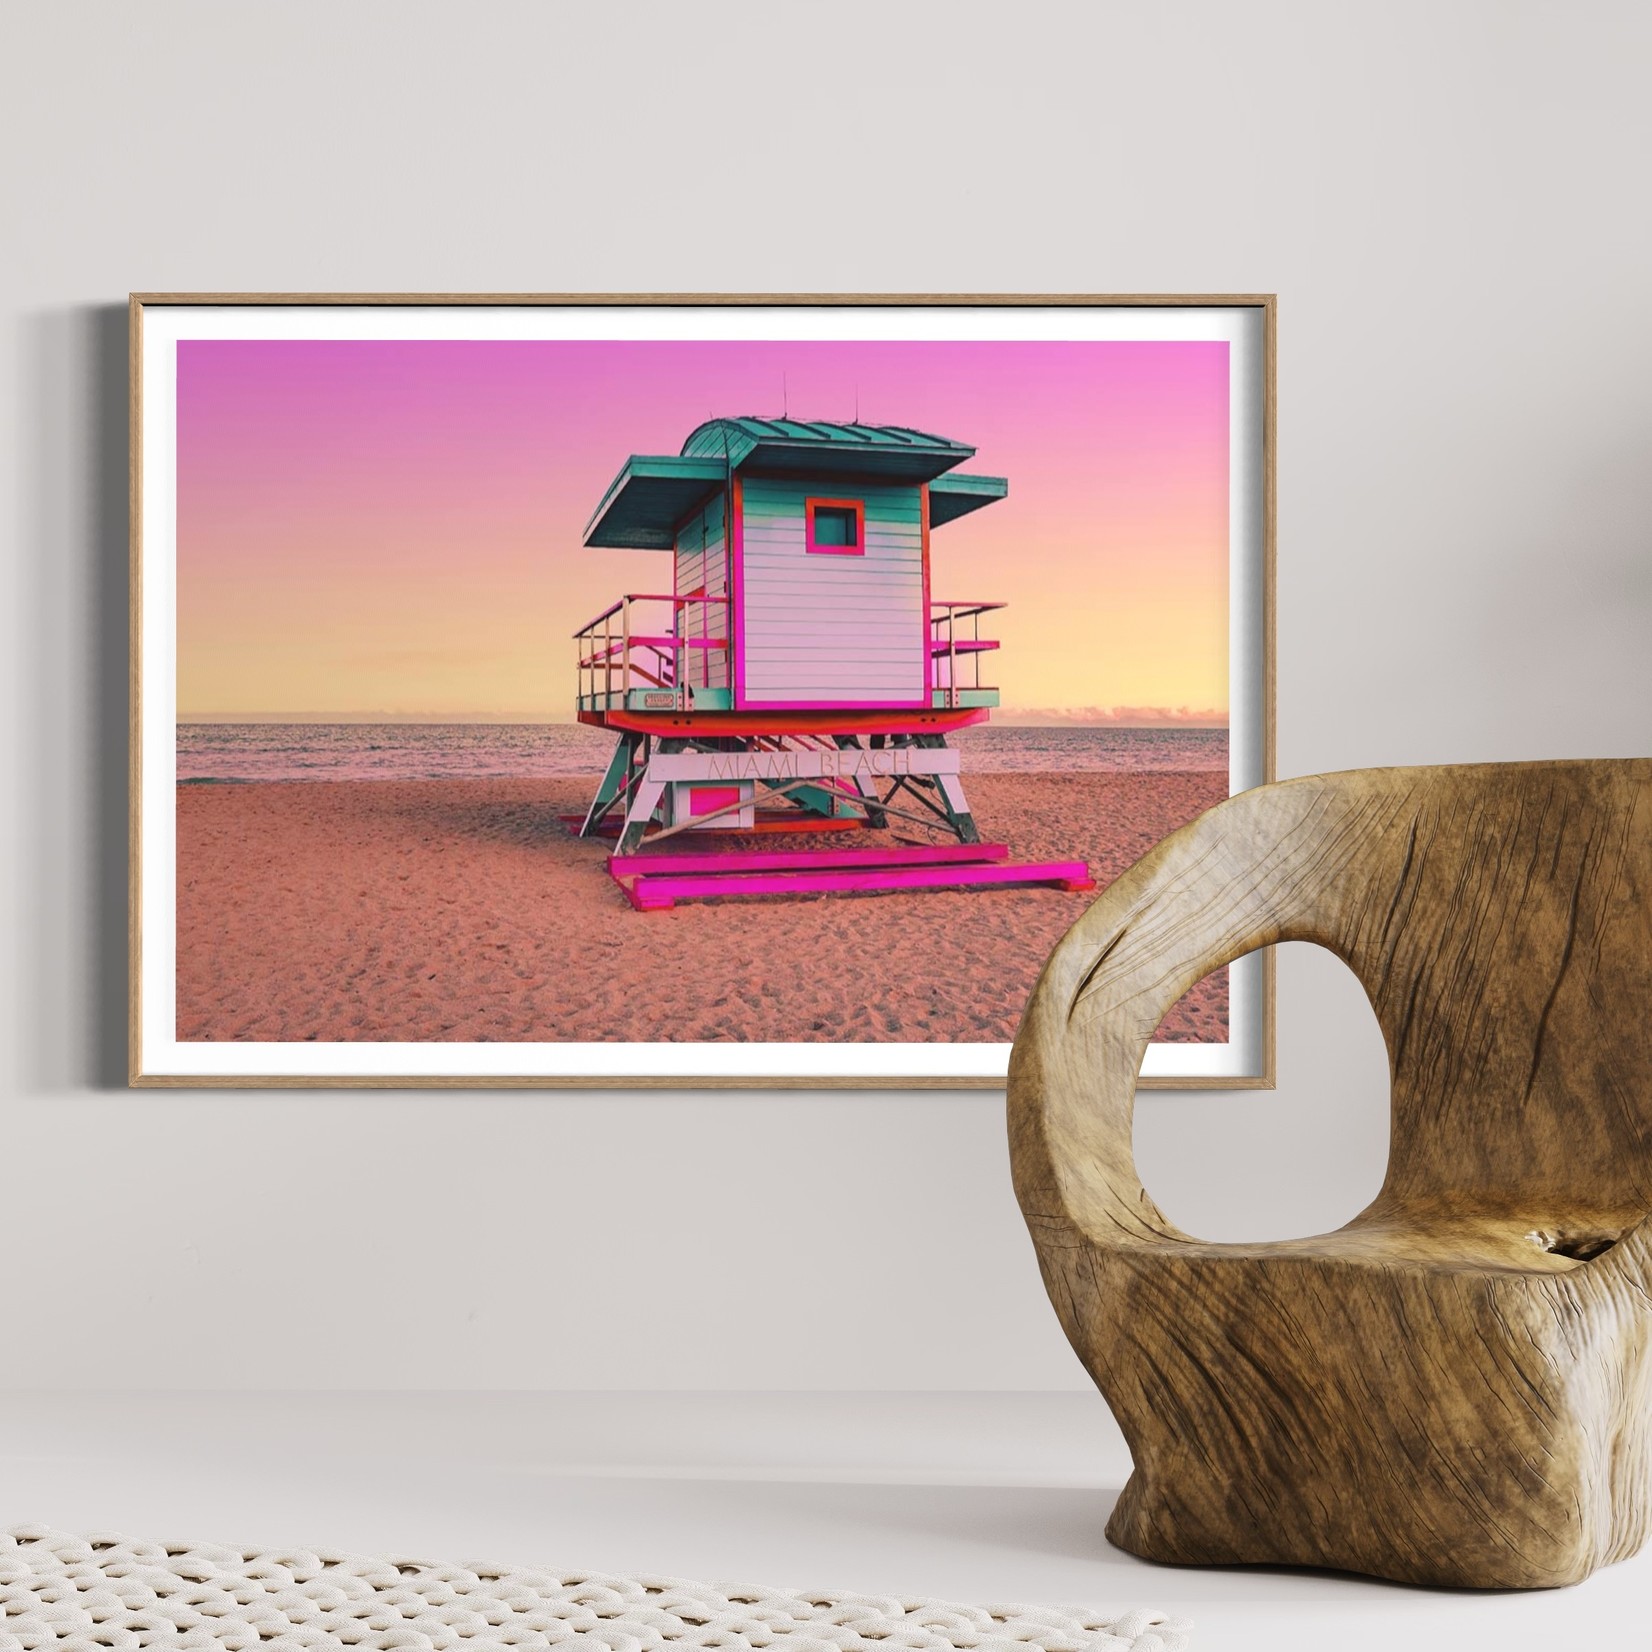 Framed Print on Rag Paper: Colorful Miami Beach lifeguard tower with stunning sunset sky and empty beach by Artur Debat via Getty Images Gallery